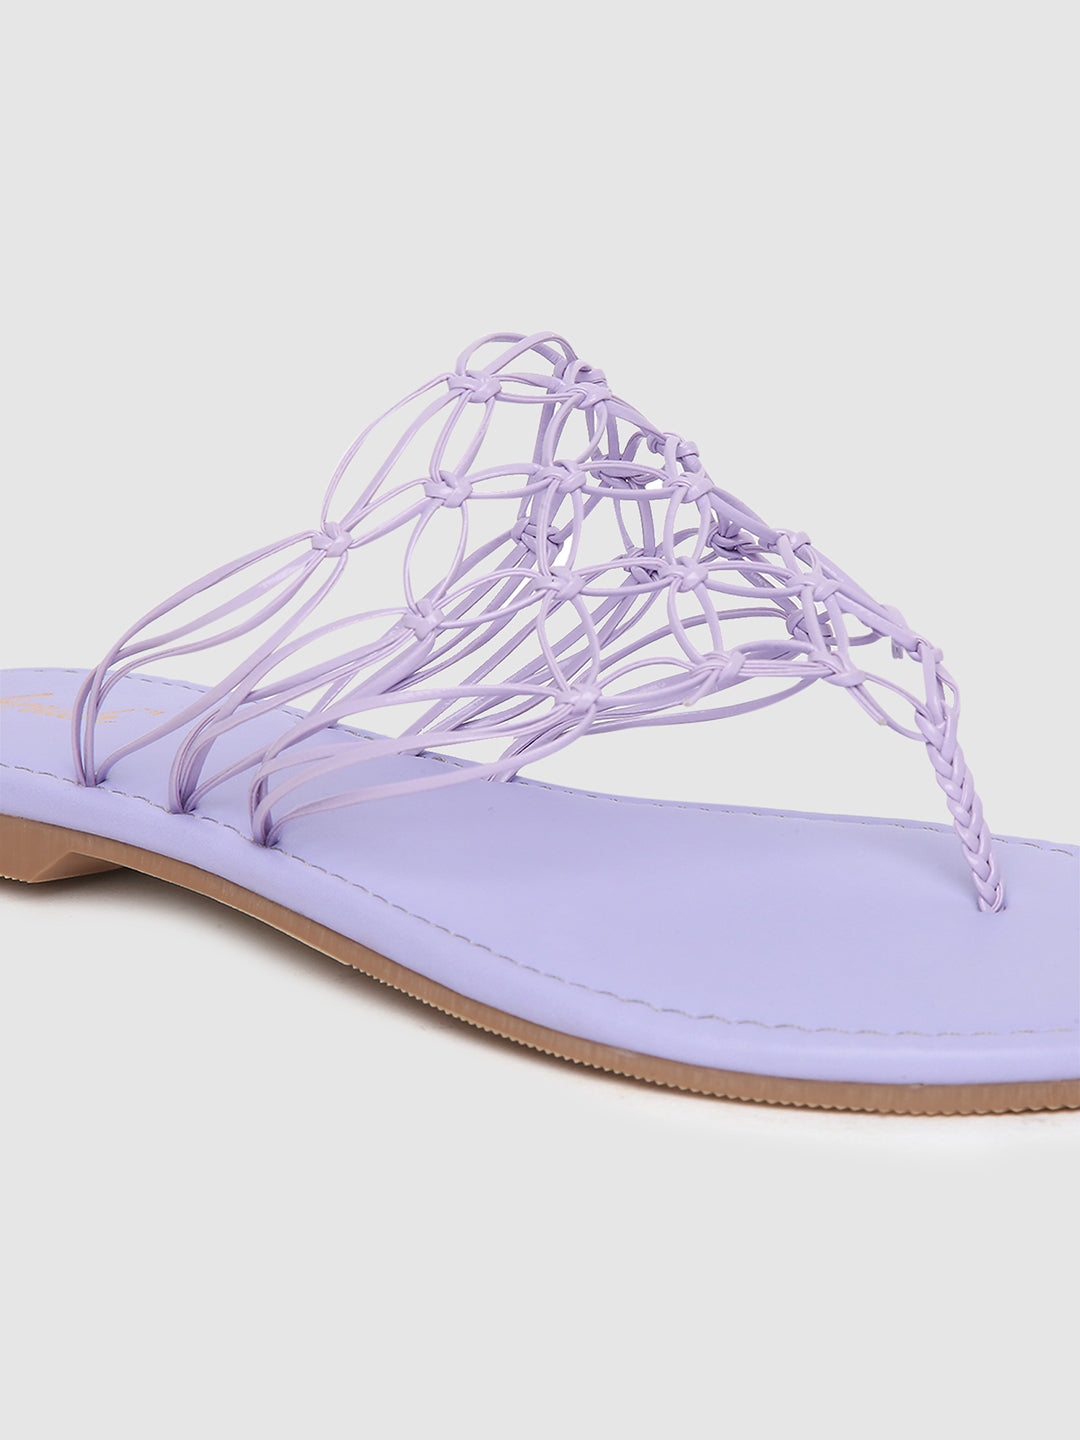 Lavender Casual Weaved Flats